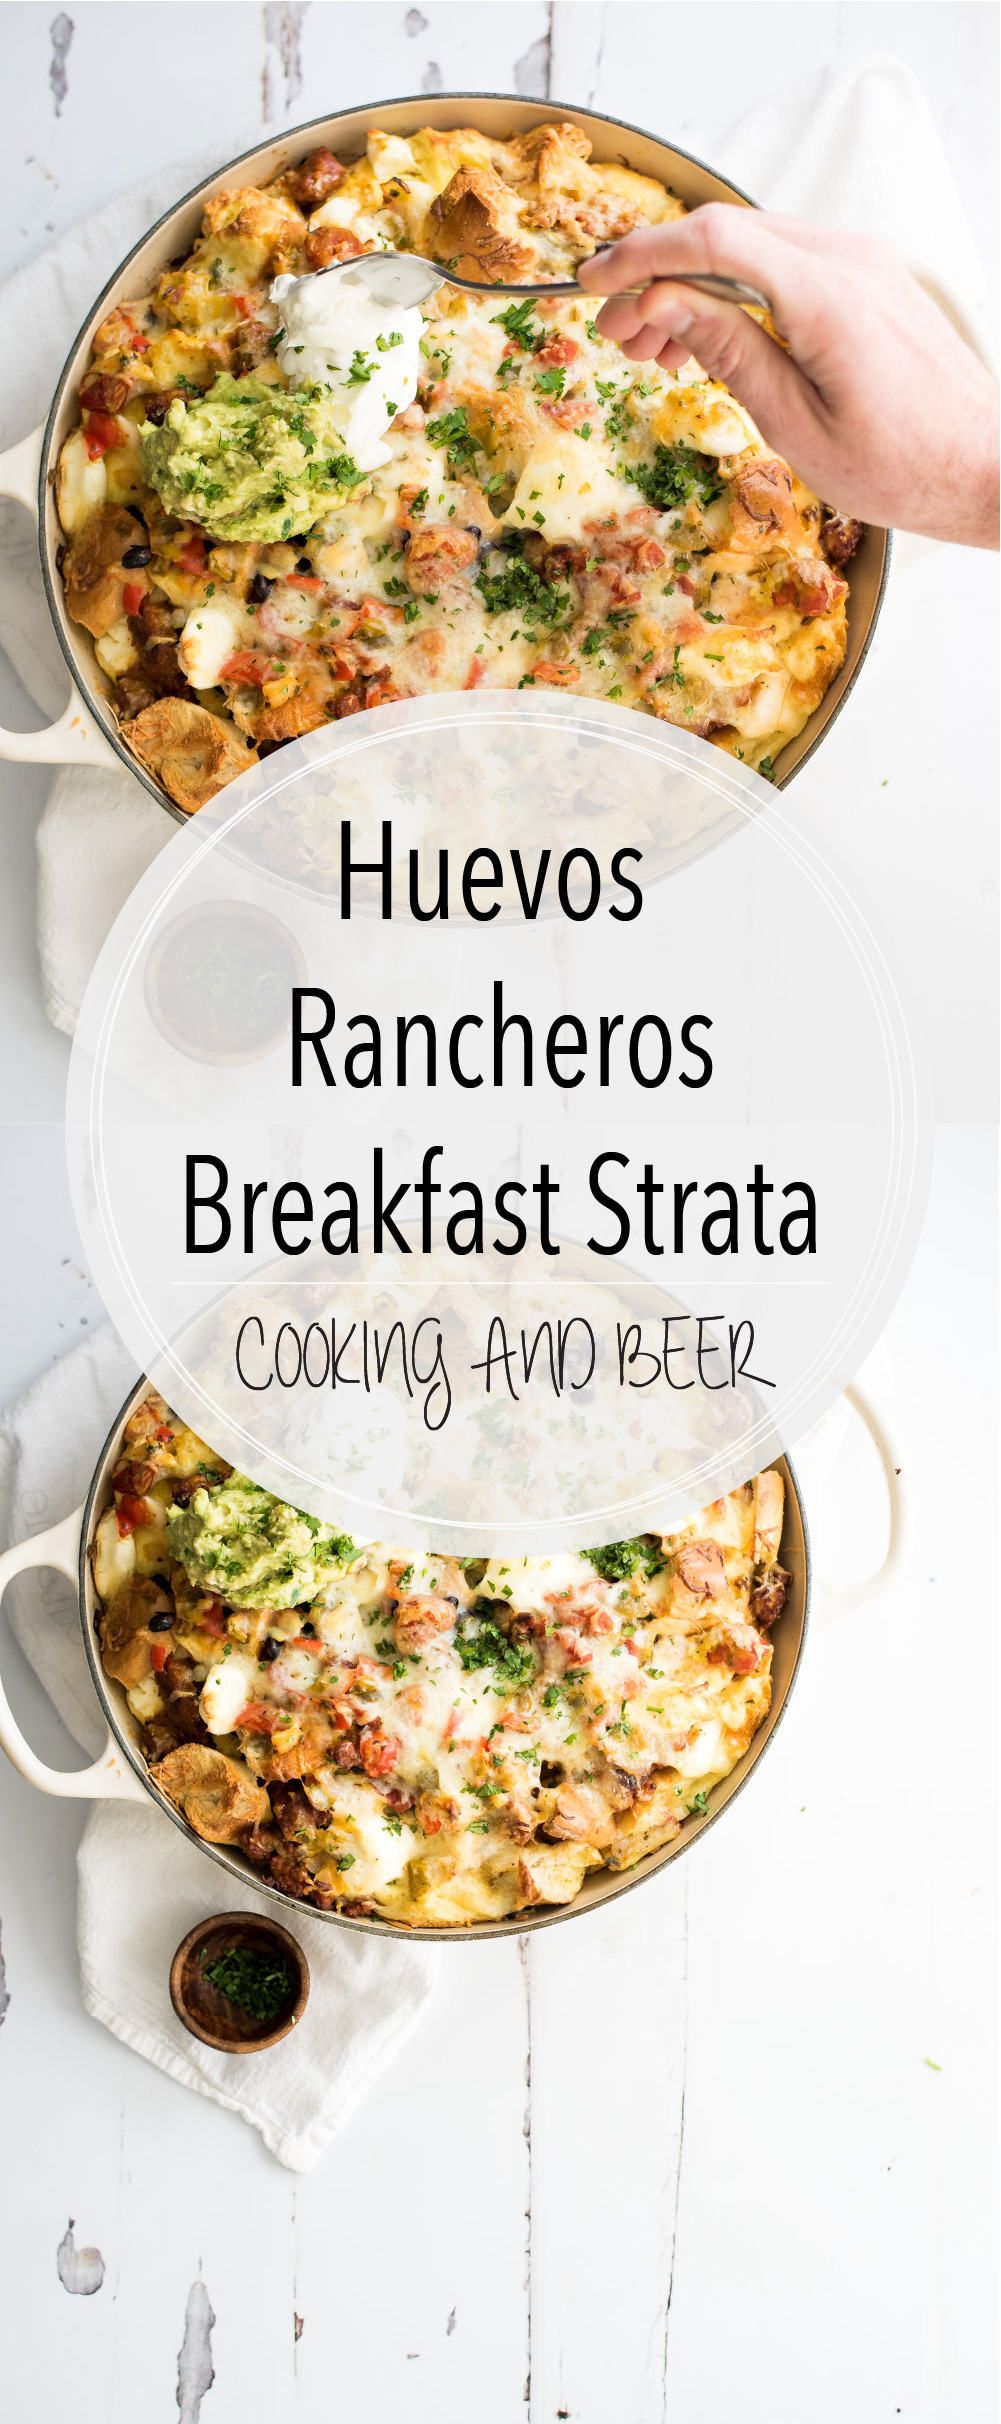 Put a large fun twist on your next breakfast casserole with this huevos rancheros breakfast strata. It's popping with flavor and perfect for a crowd!